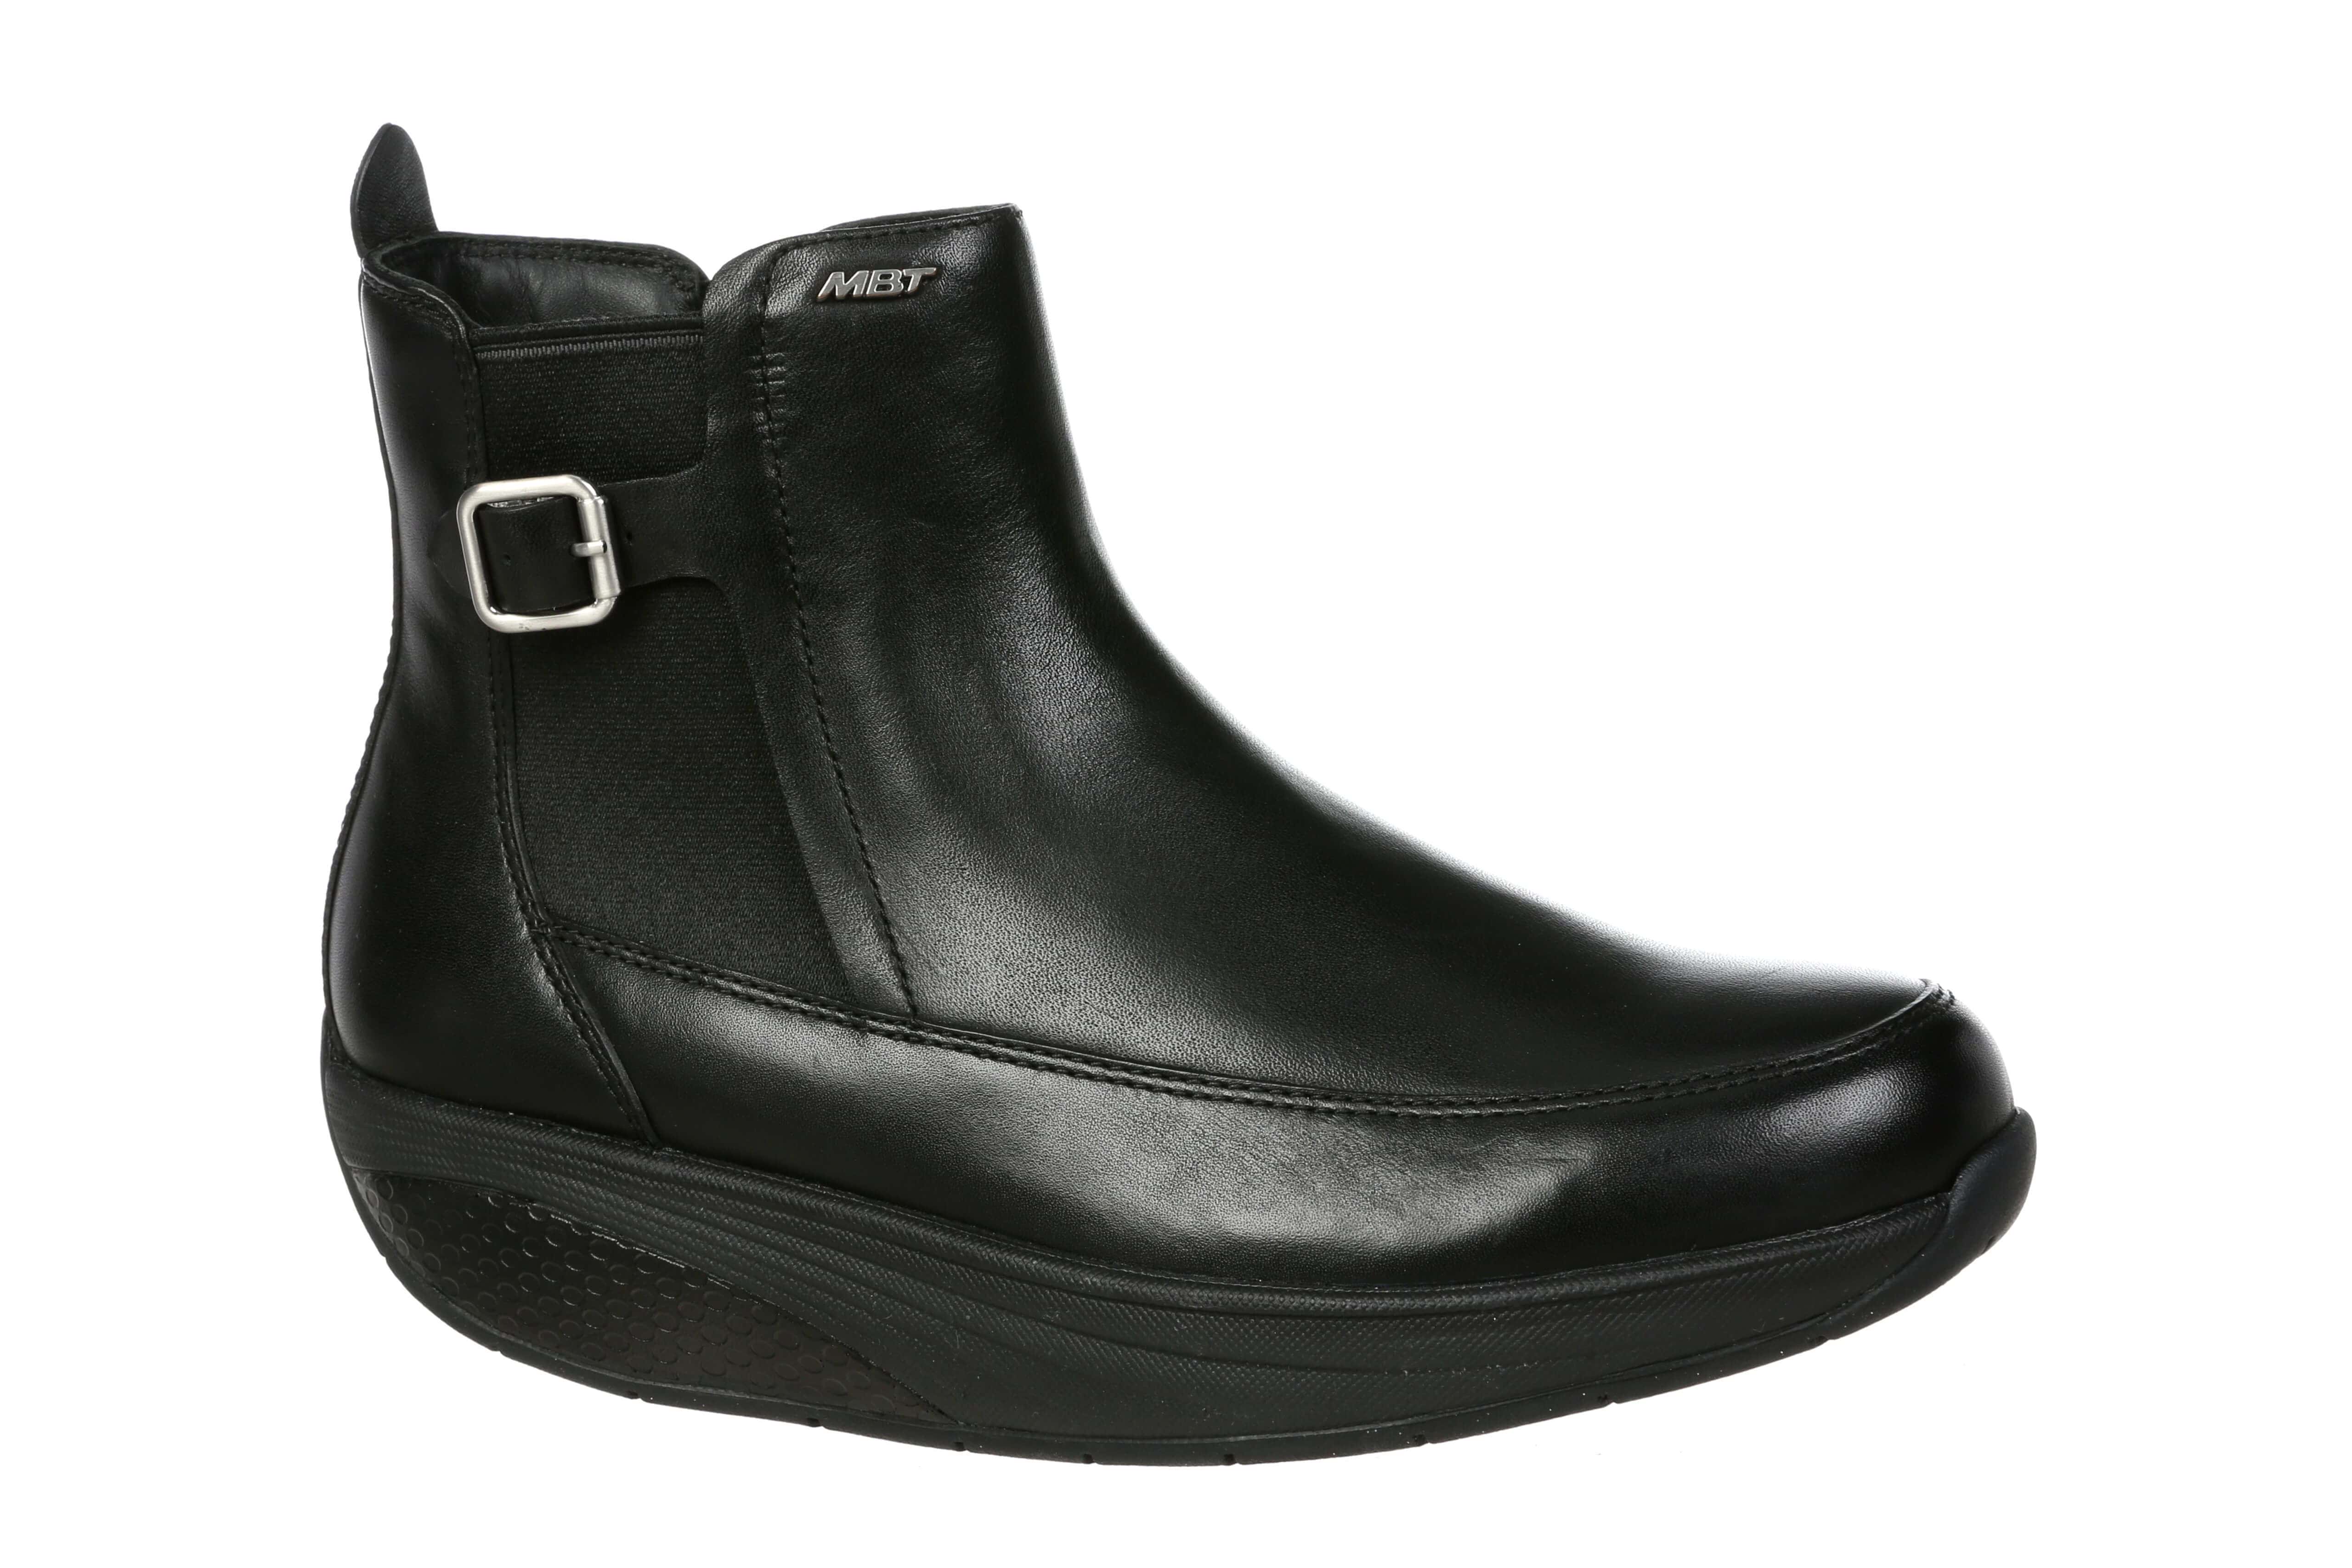 MBT CHELSEA BLACK LEATHER WOMAN BOOT